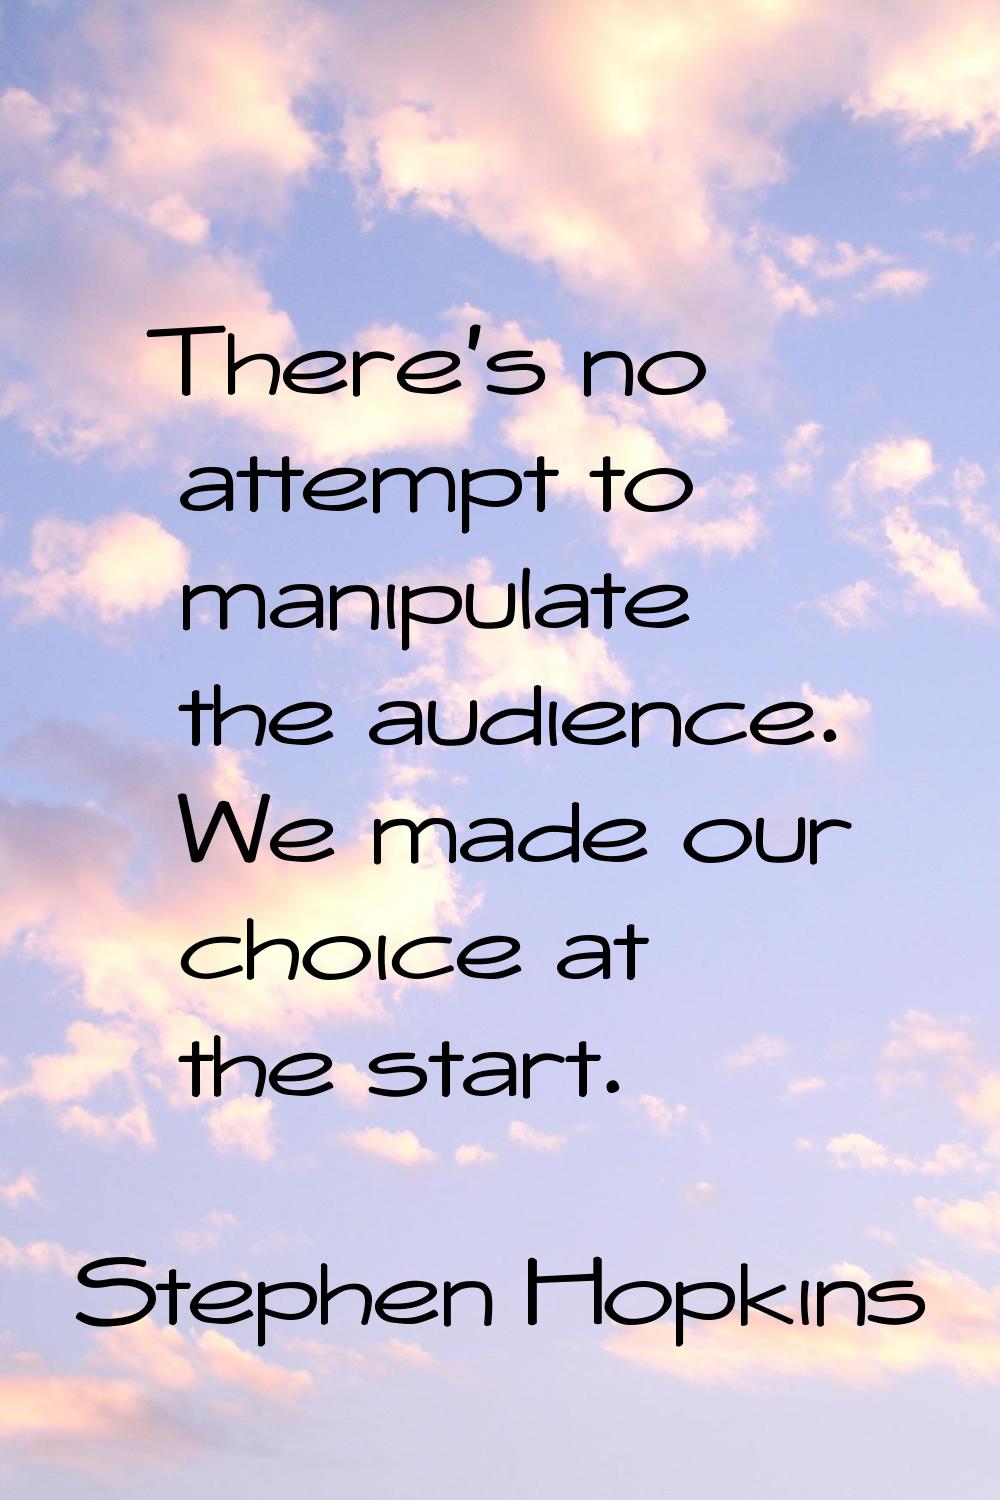 There's no attempt to manipulate the audience. We made our choice at the start.